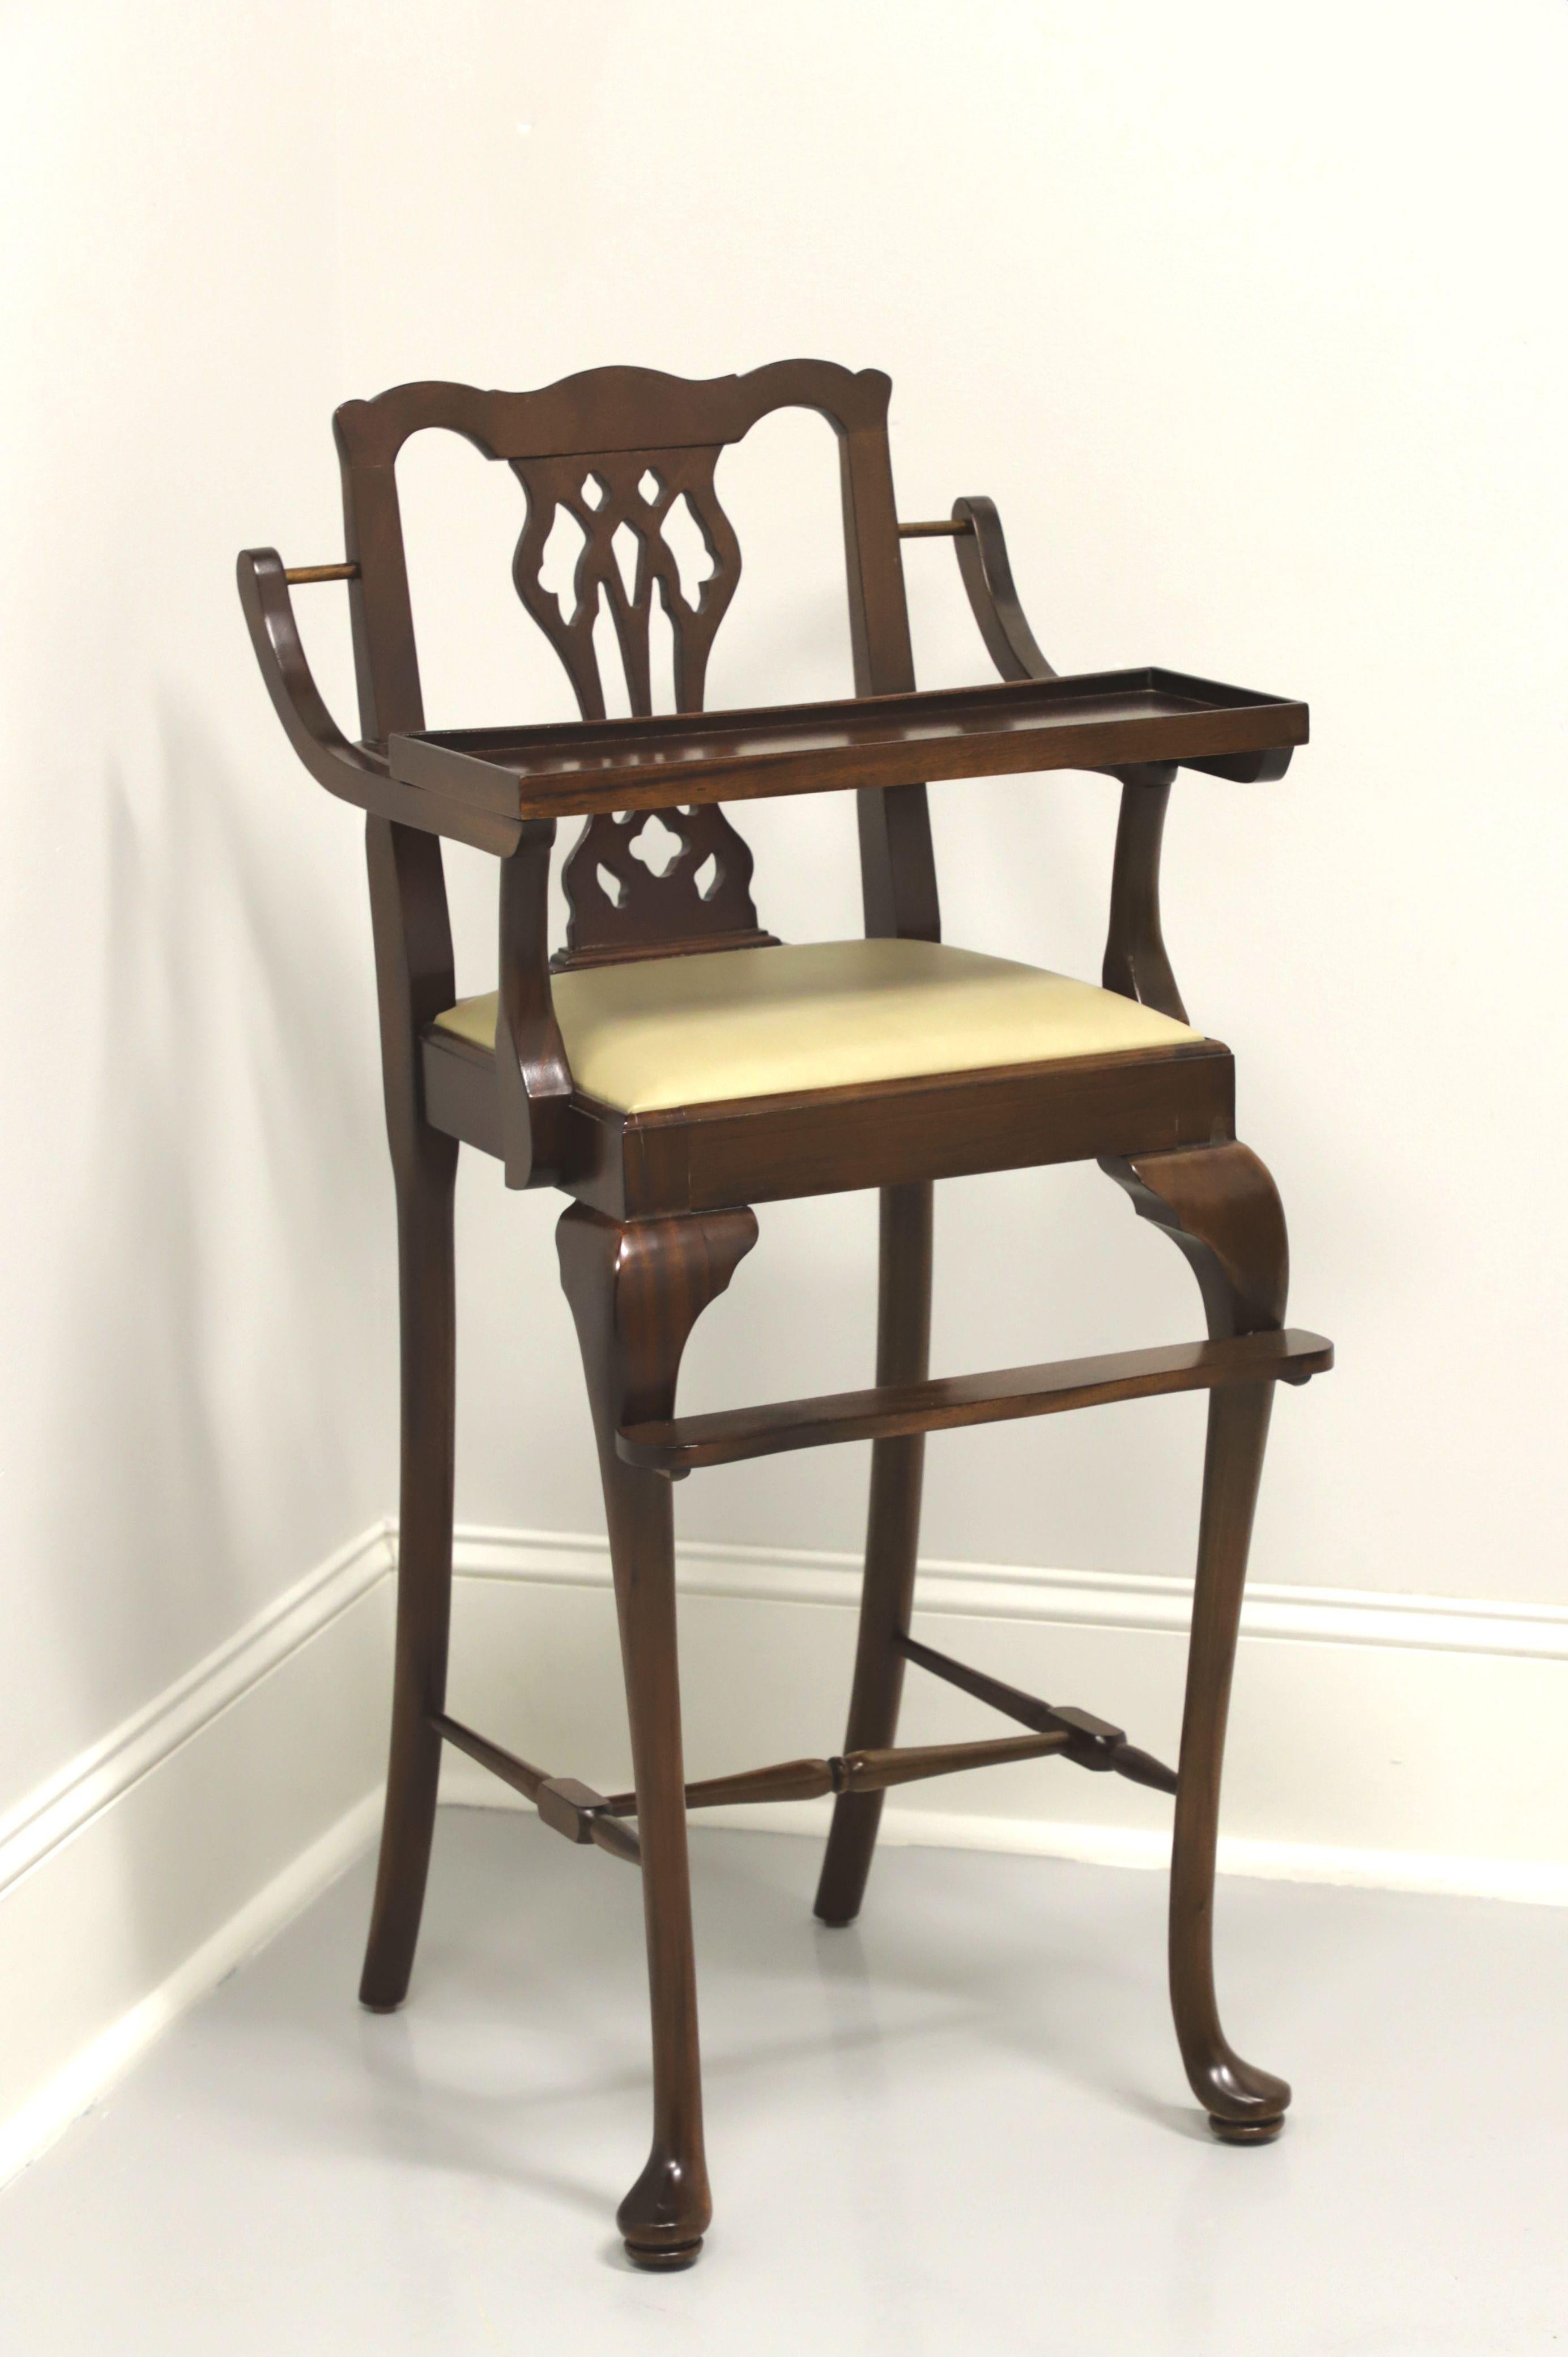 MADISON SQUARE Mahogany Queen Anne Child's High Chair 2